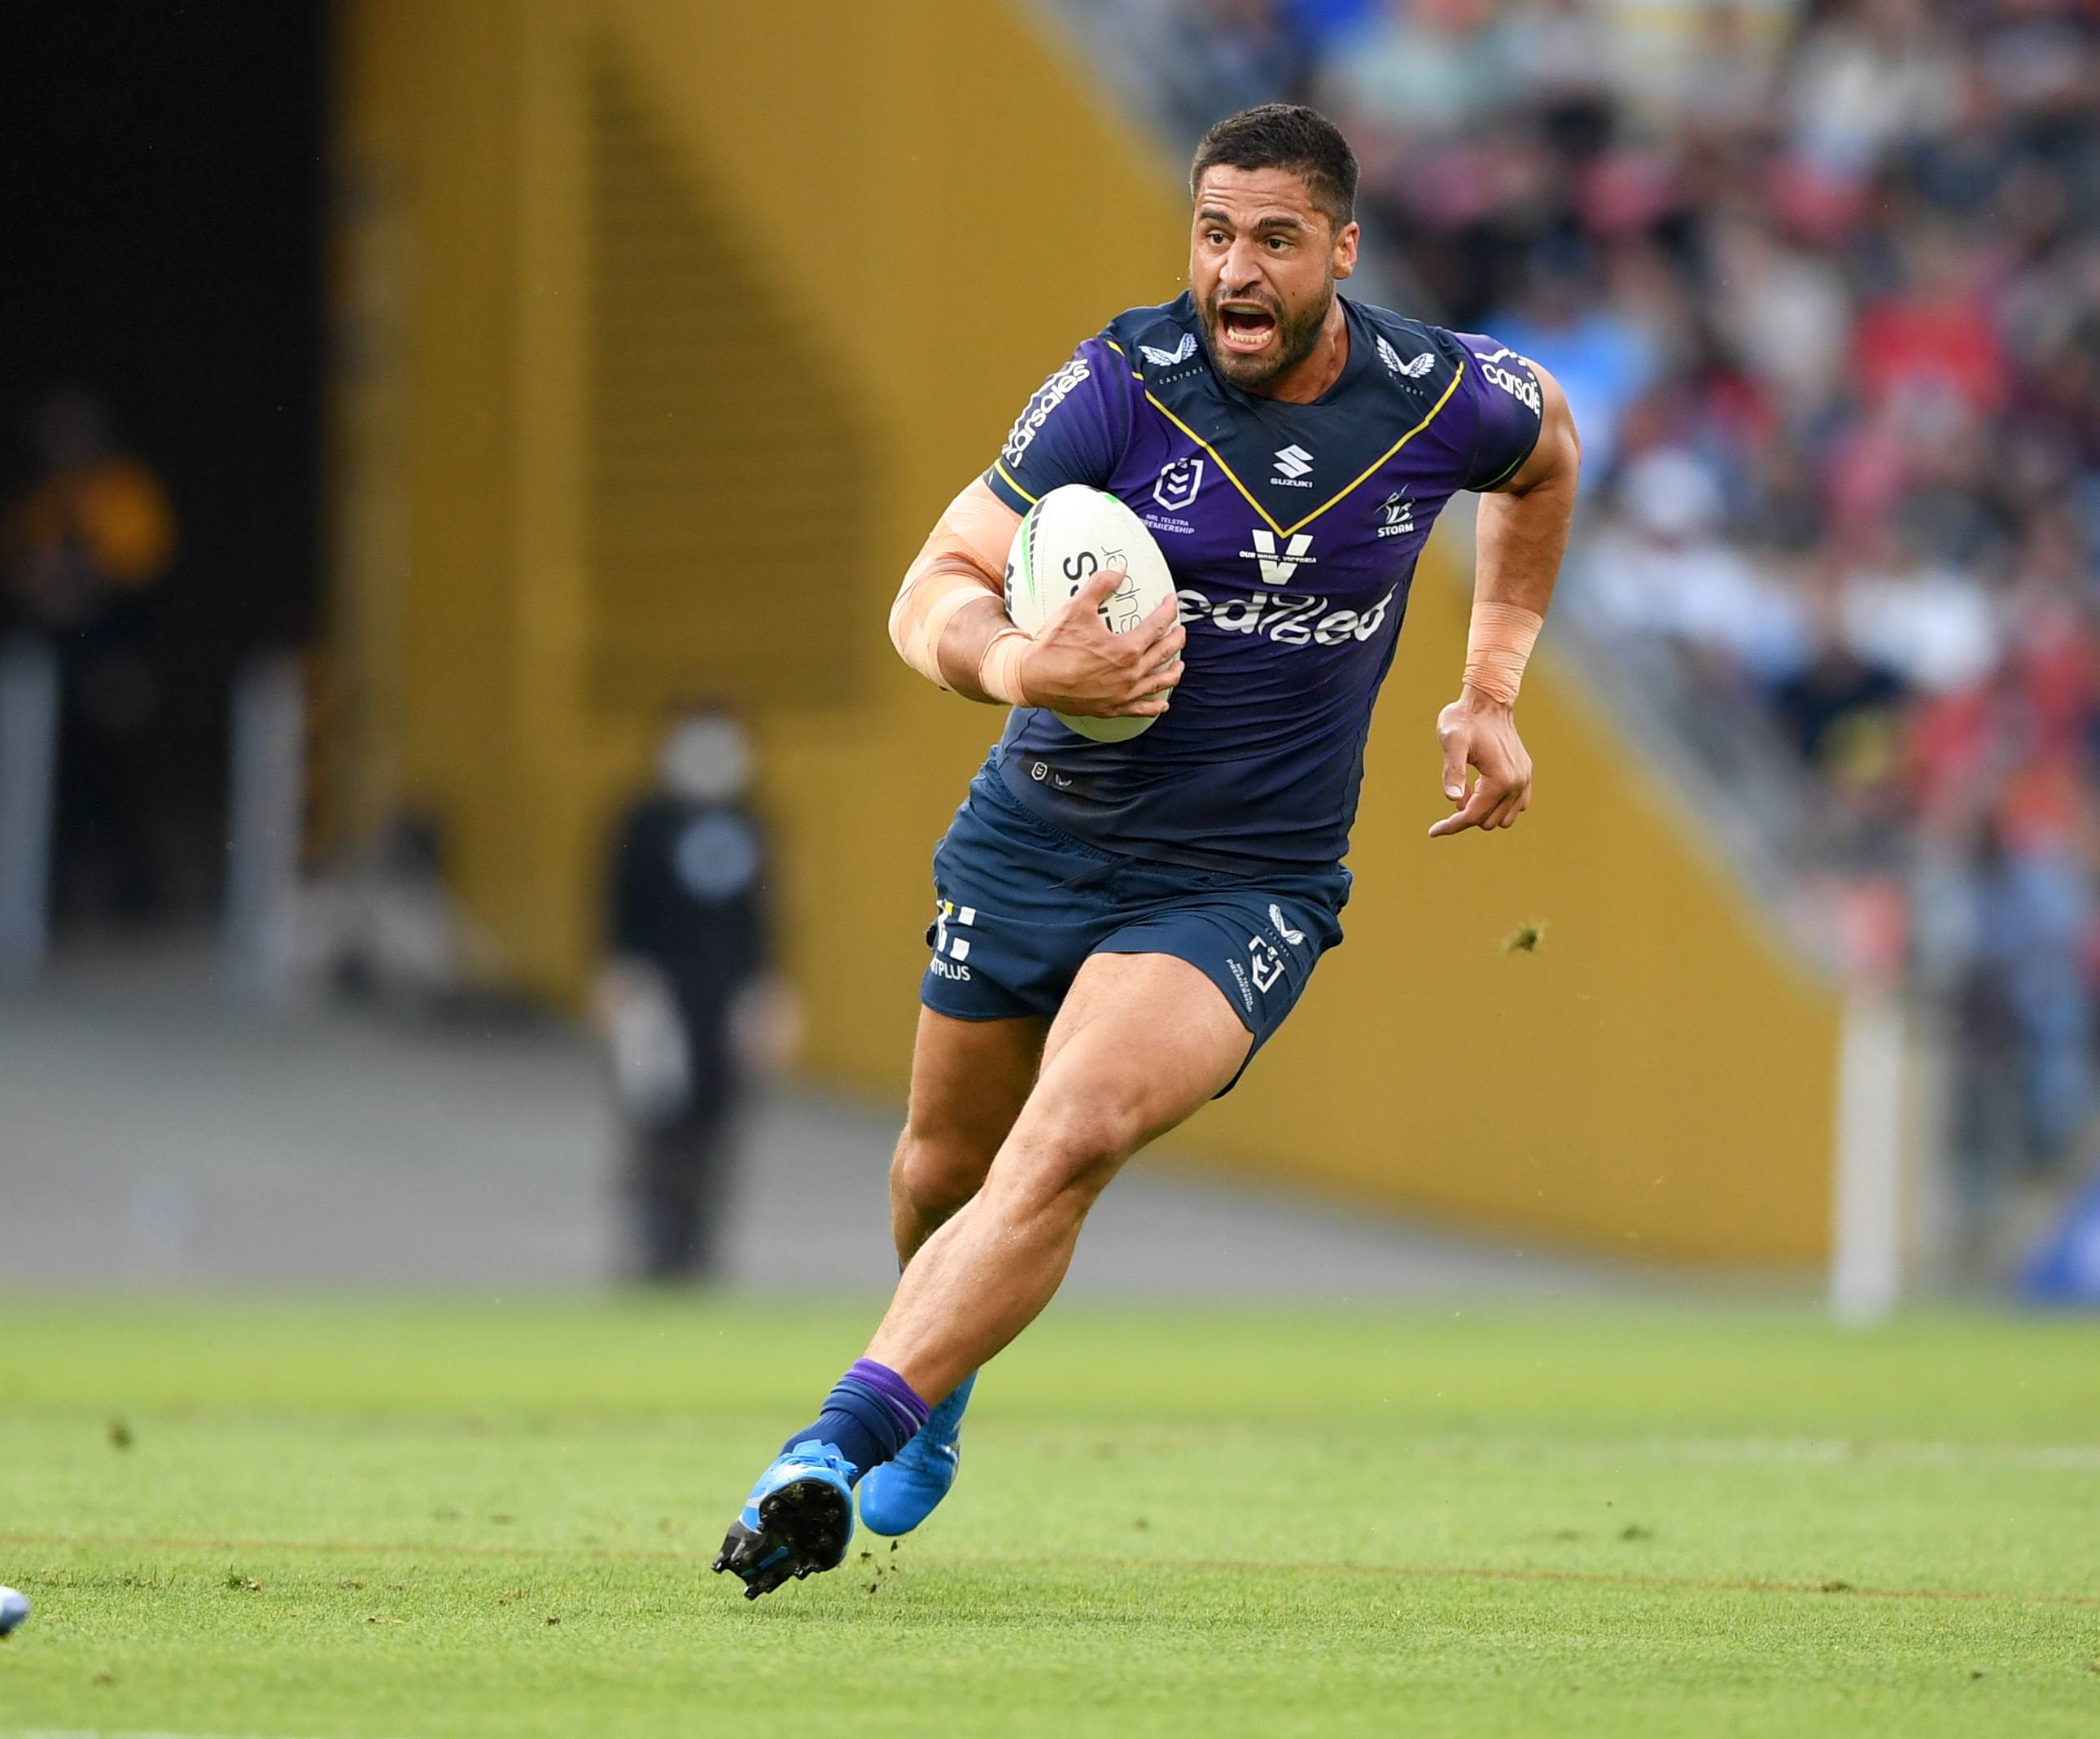 Melbourne Storm captain Jesse Bromwich ruled out of first round due to COVID-19 protocols